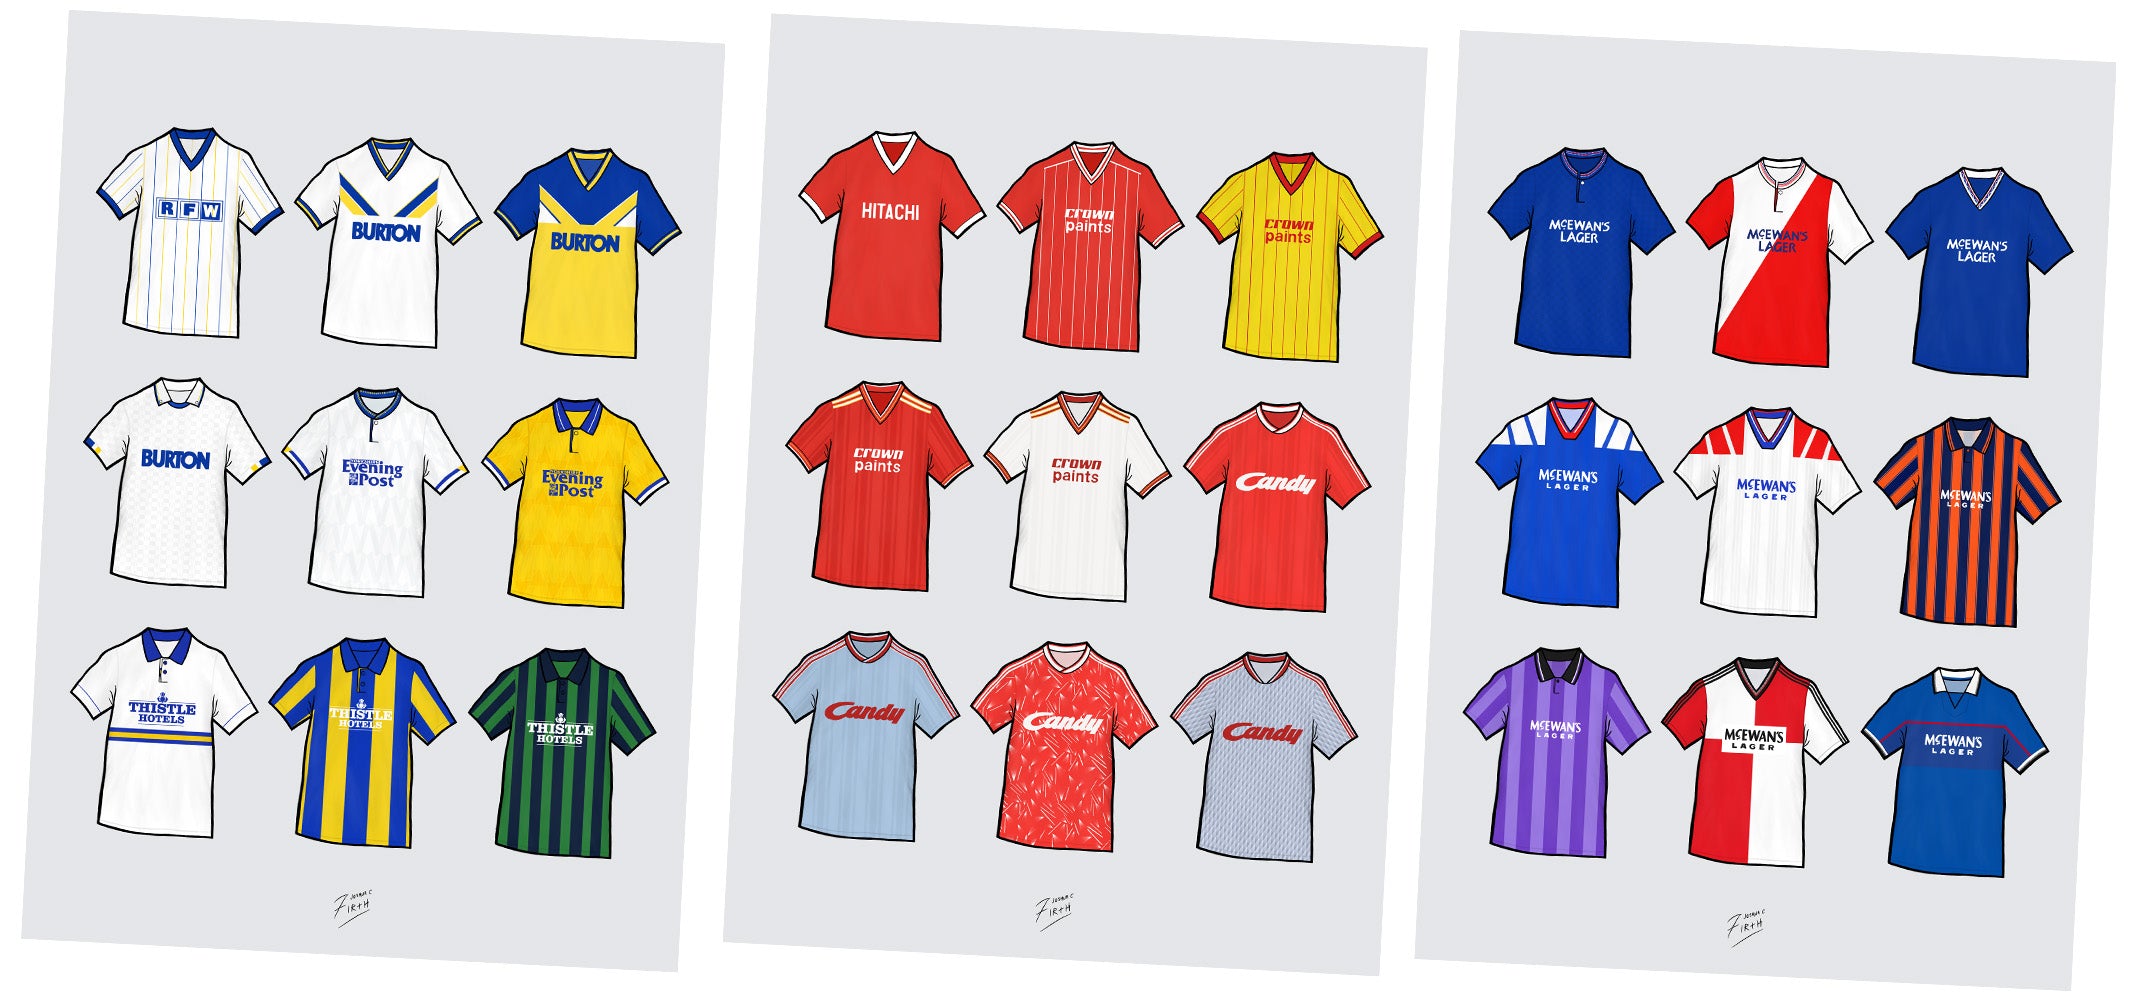 Retro football shirts artwork inspired by the history of Leeds, Liverpool & Rangers